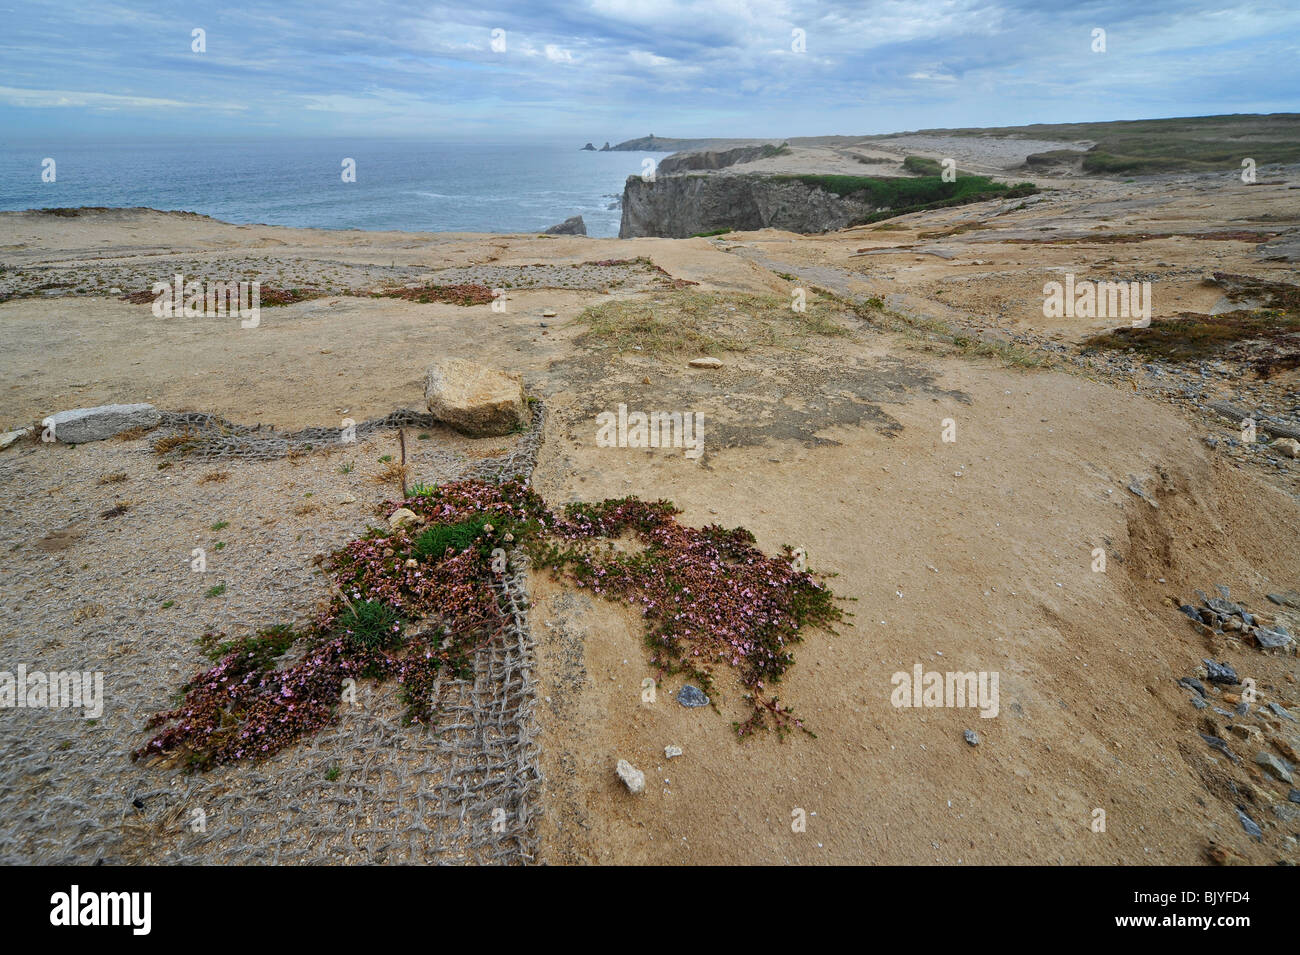 Restoration of trampled vegetation by tourists on top of the sea cliffs at the Wild Coast / Côte Sauvage, Brittany, France Stock Photo